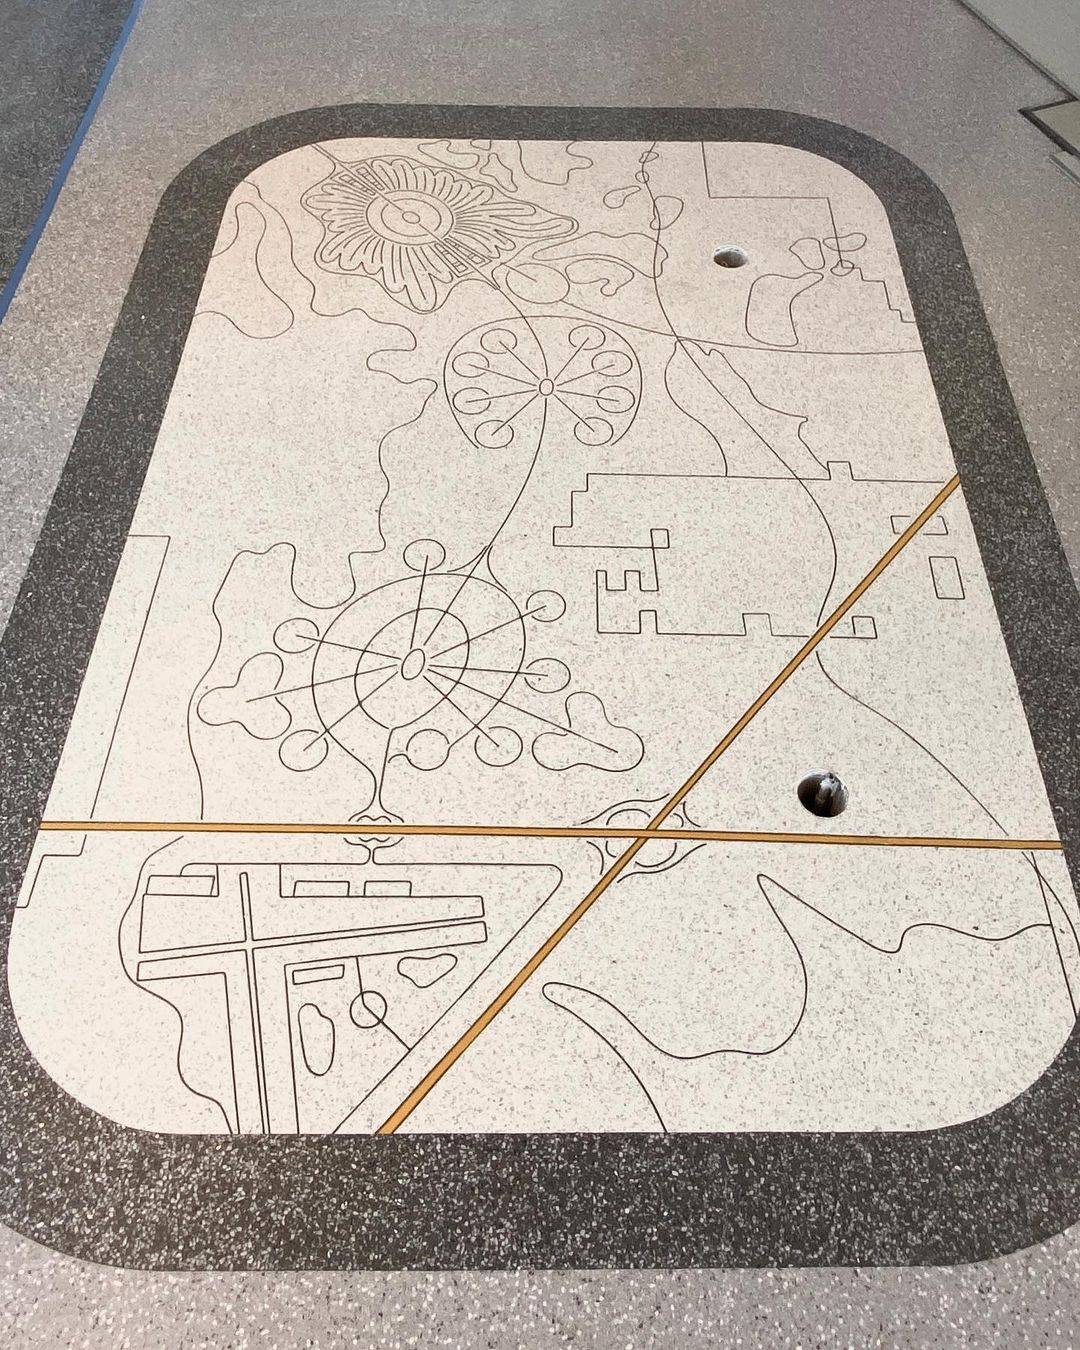 Flooring at Connections Cafe and Eatery draws inspiration from original Walt Disney World and EPCOT concepts and plans